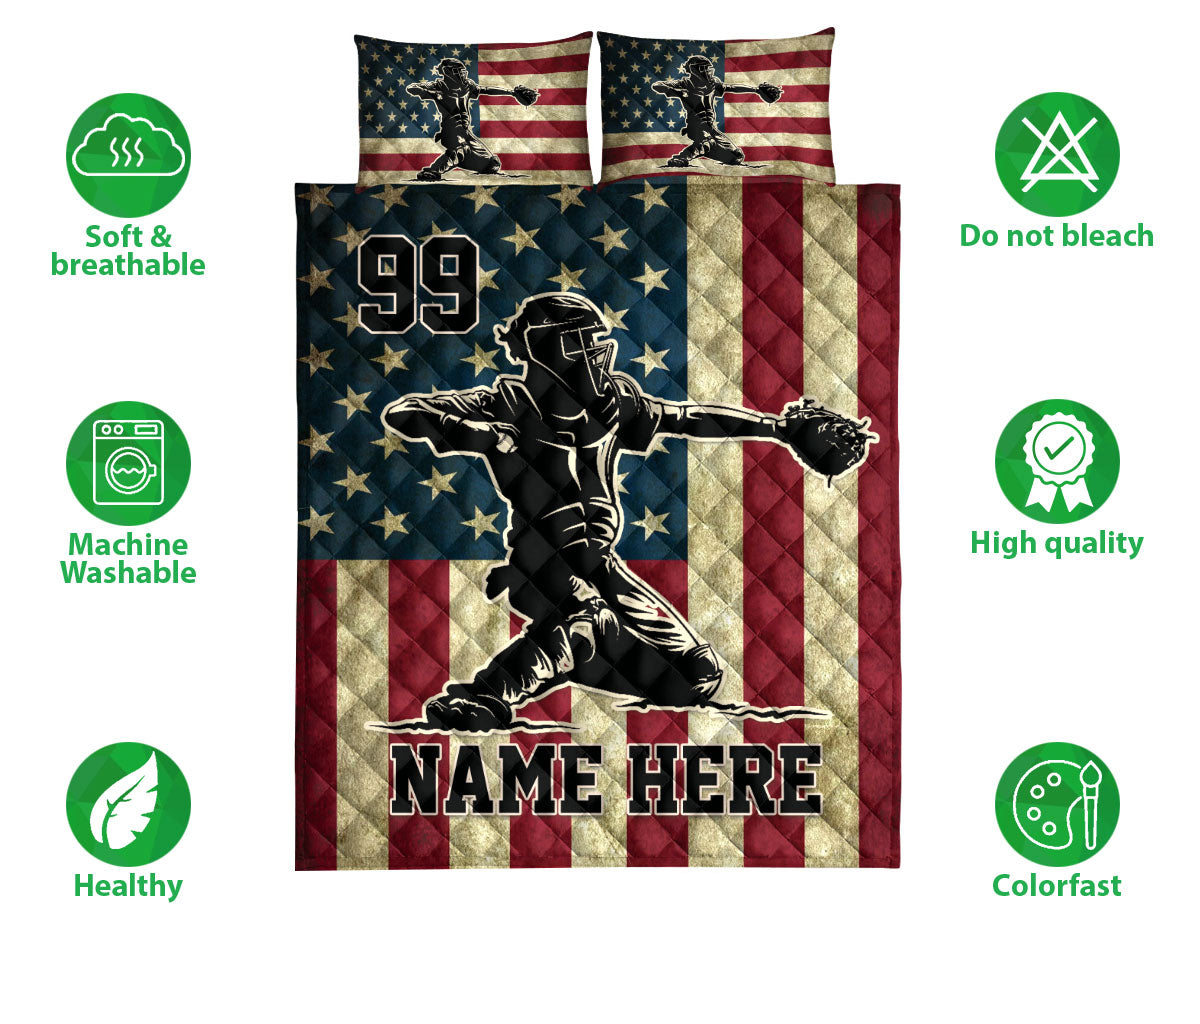 Ohaprints-Quilt-Bed-Set-Pillowcase-Baseball-Player-Catcher-American-Flag-Vintage-Custom-Personalized-Name-Blanket-Bedspread-Bedding-3183-Double (70'' x 80'')